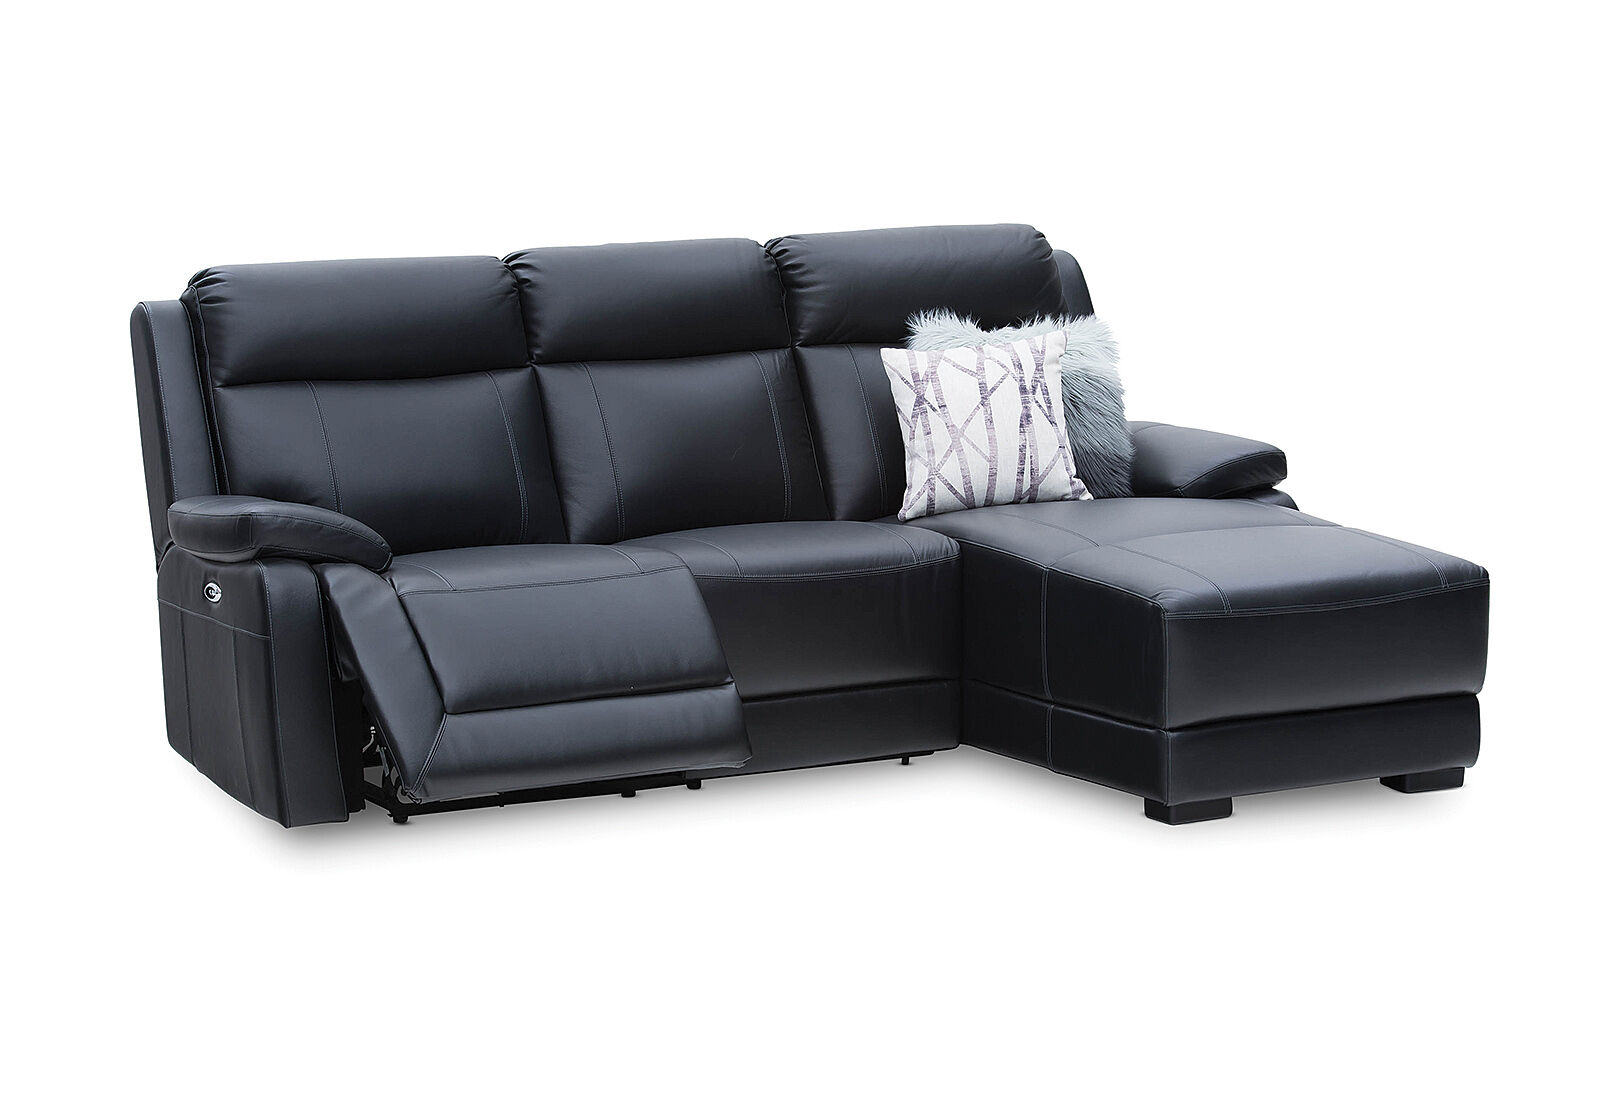 Black San Marco Leather 3 Seater Chaise, Black Leather 3 Seater Chaise Lounge